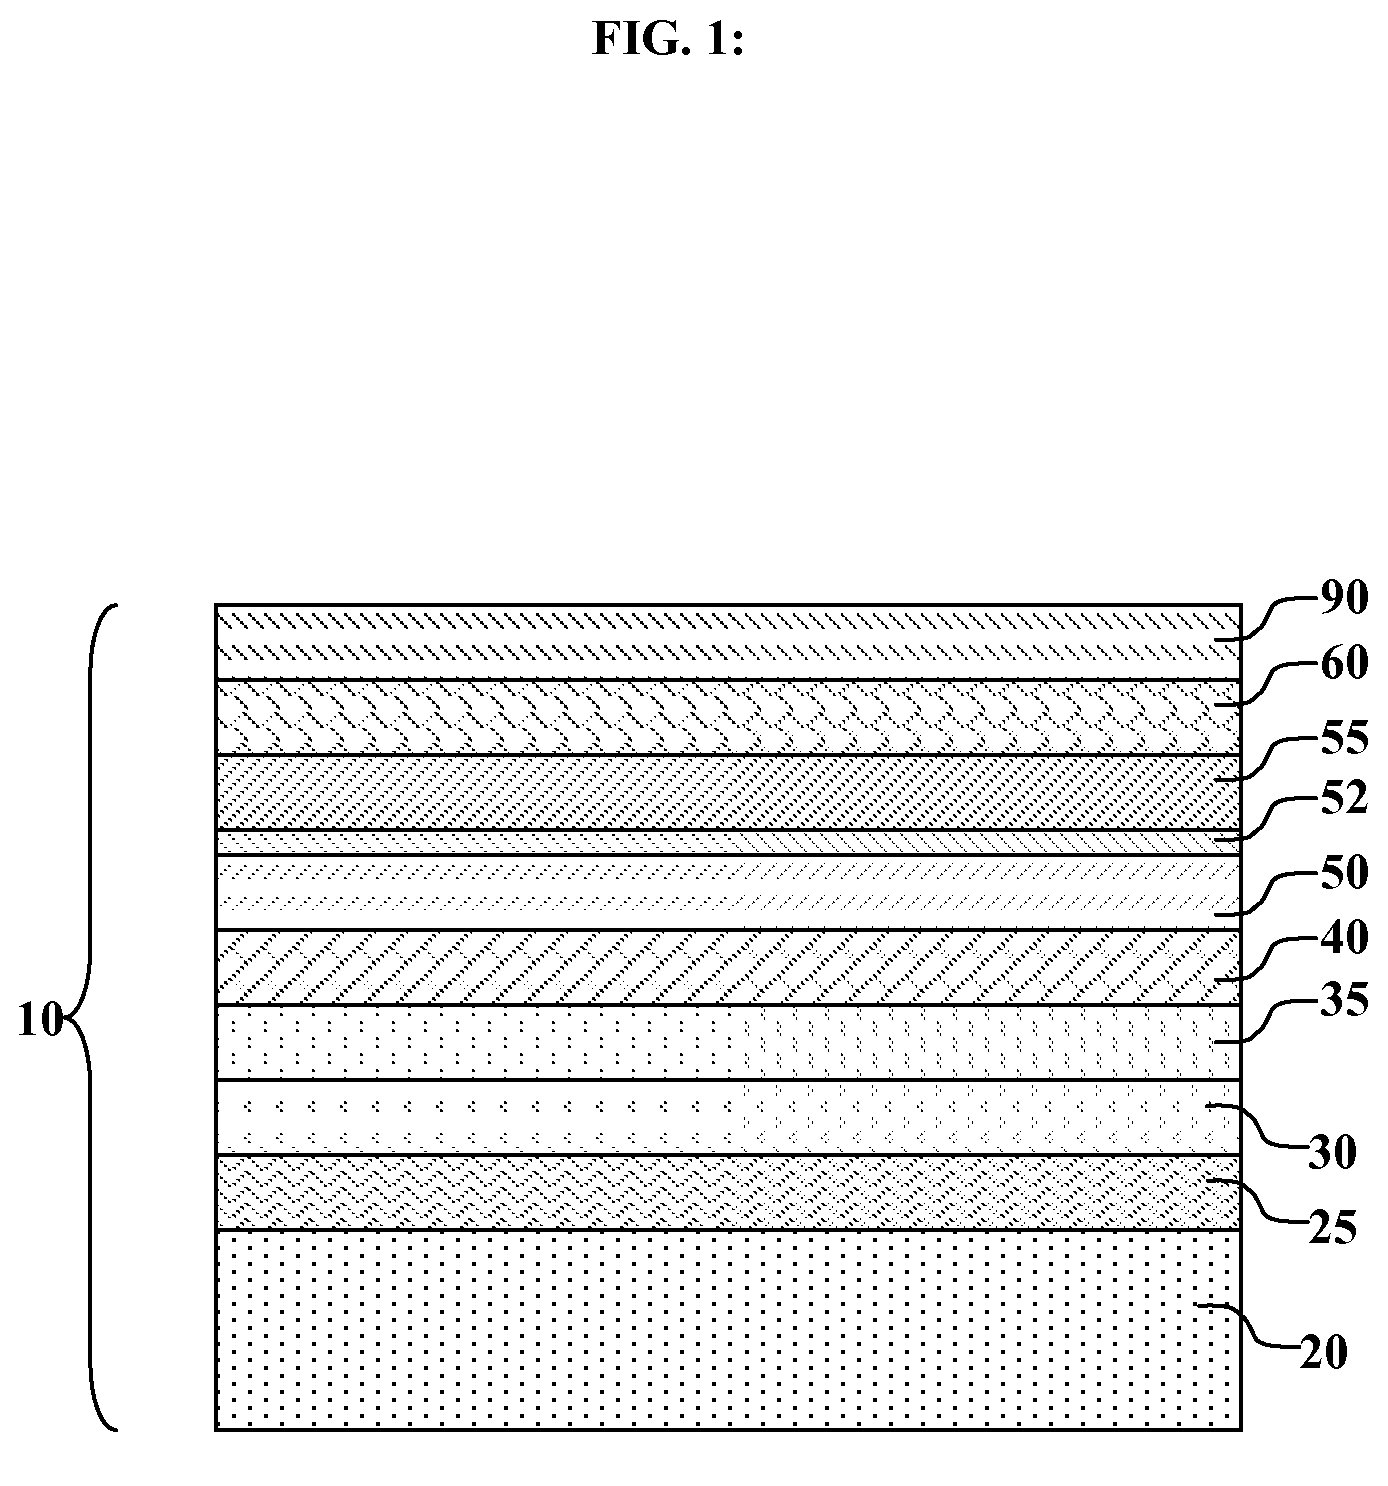 Dual electron-transporting layer for OLED device